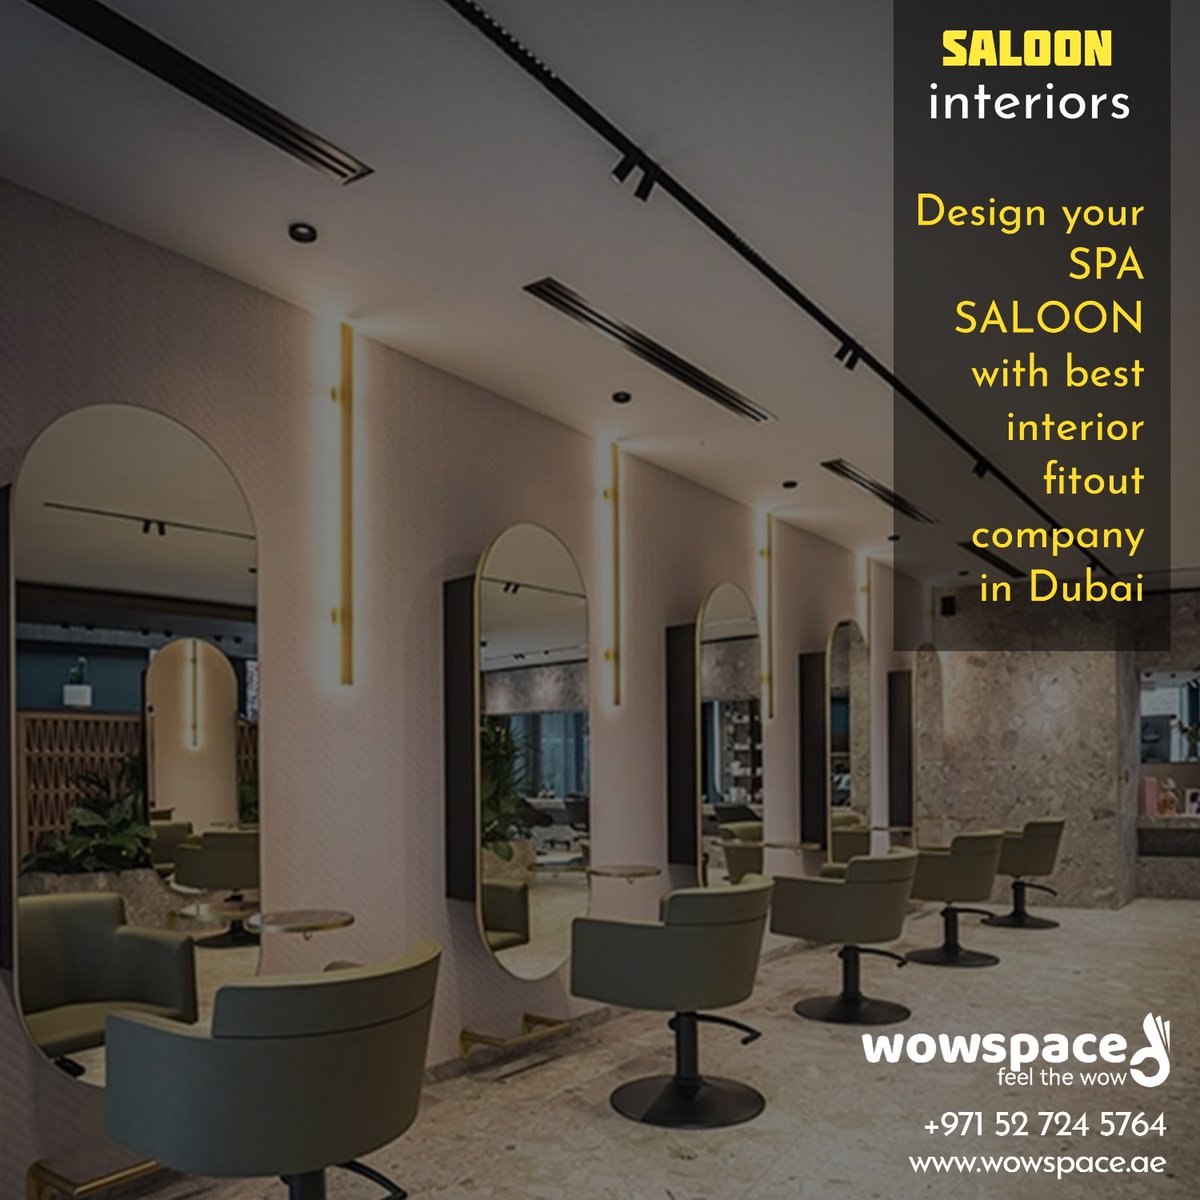 Best interior fitout contractor in dubai for your SPA and SALOON interiors.

#wowspacedubai #wowspaceuae #fitoutcontractor #retailfitout #retaildesigner #retailinteriors #retailfitoutcontractor #showroominteriiors #fashionshowrooms #salooninteriors #spainteriors